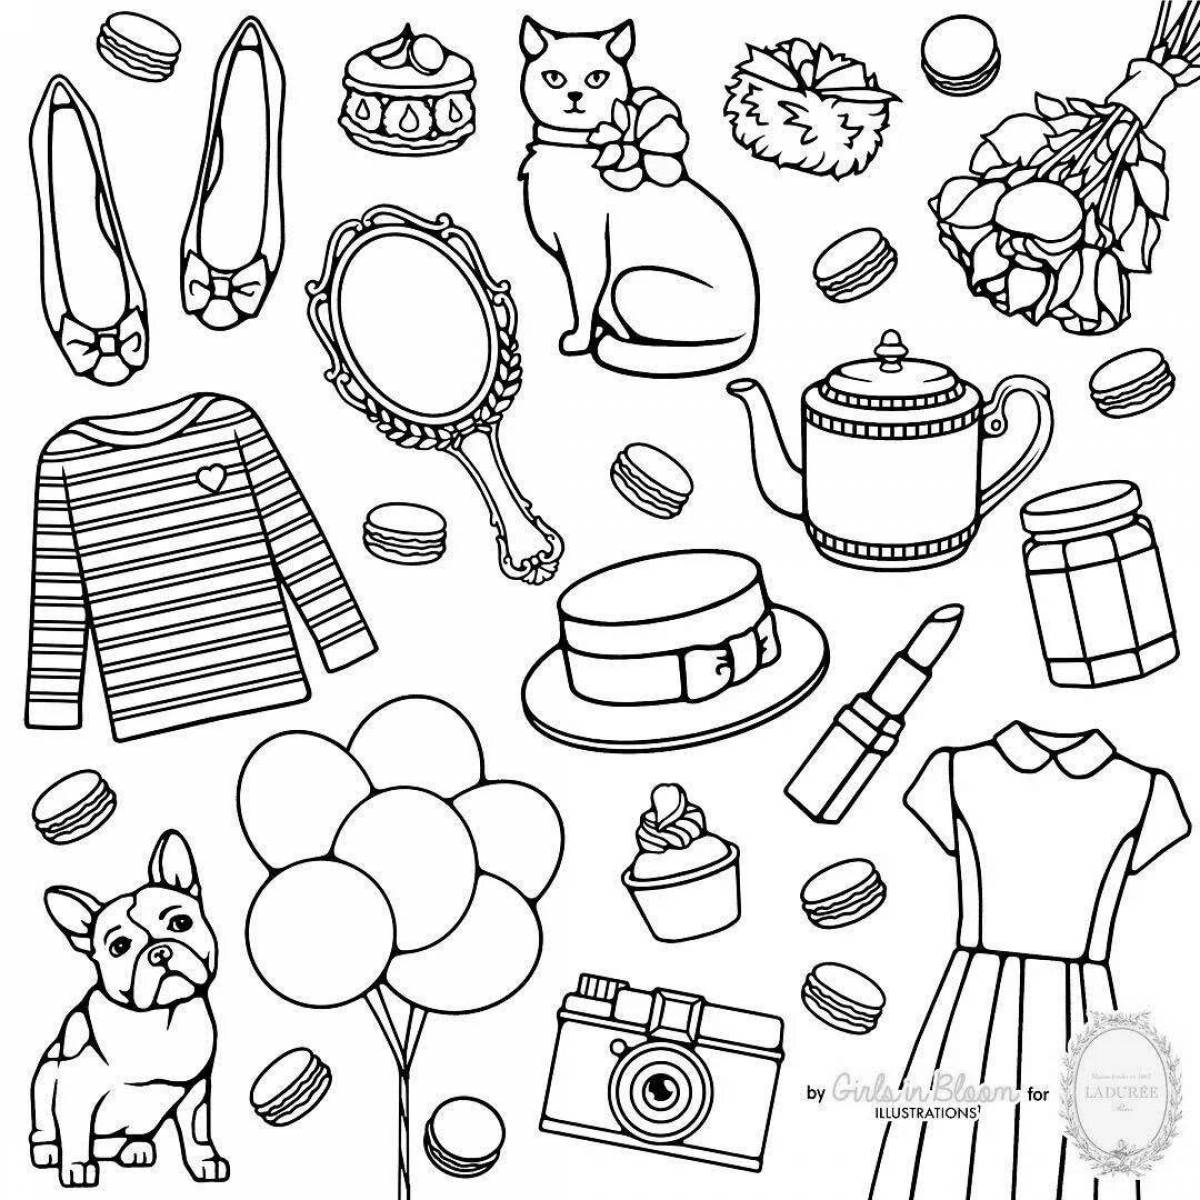 Coloring page wild accessories for girls